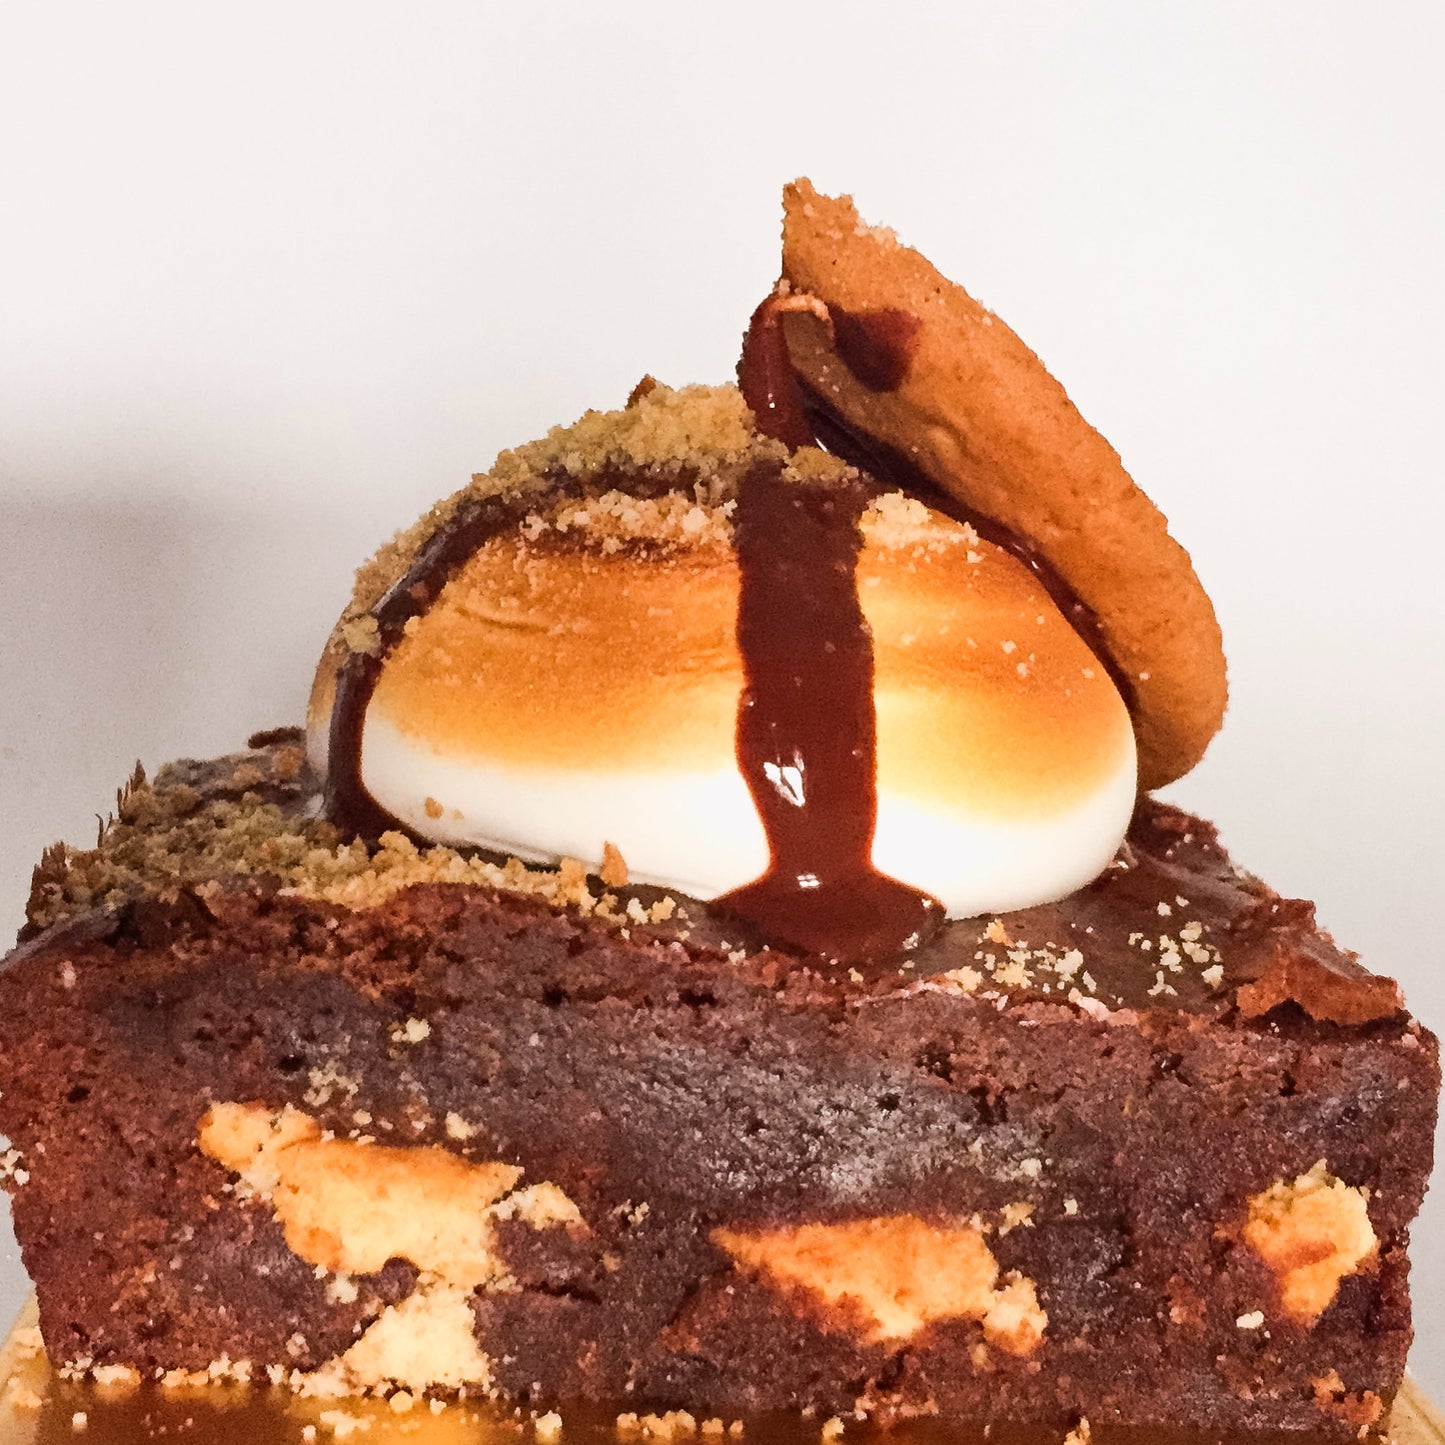 The S’mores Brownie